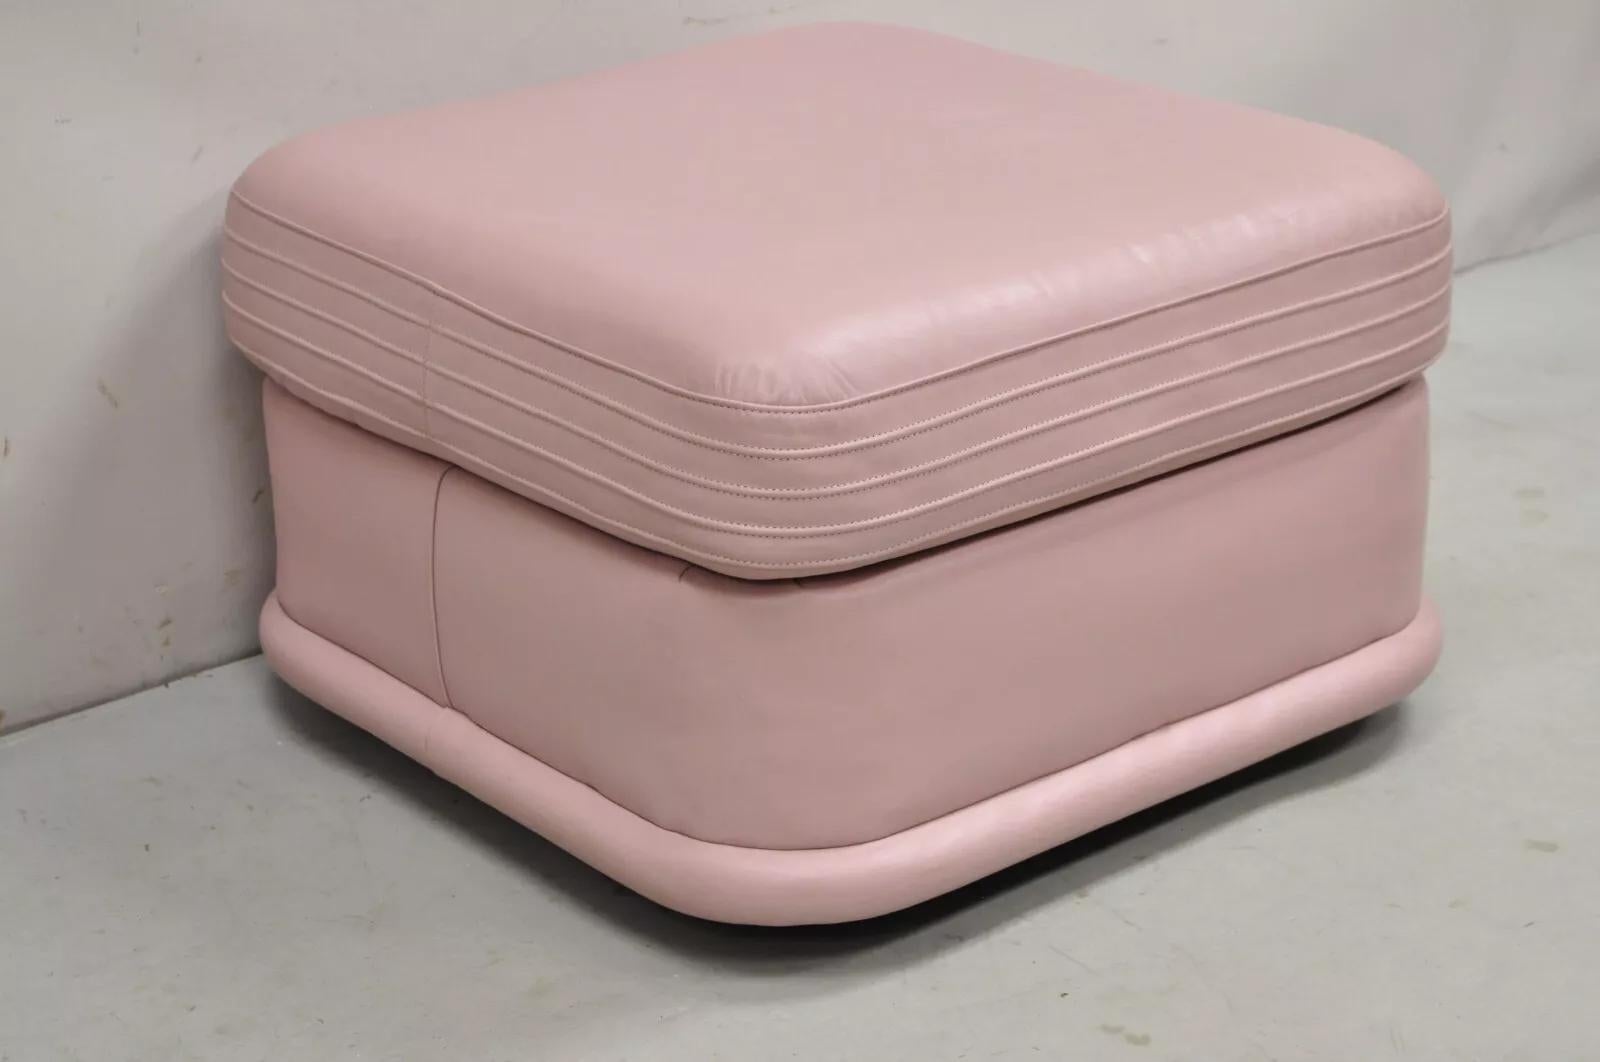 Vintage Mid Century Post Modern Emerson Leather Bubblegum Pink Stitched Square Ottoman Stool. Item features small wooden feet, 